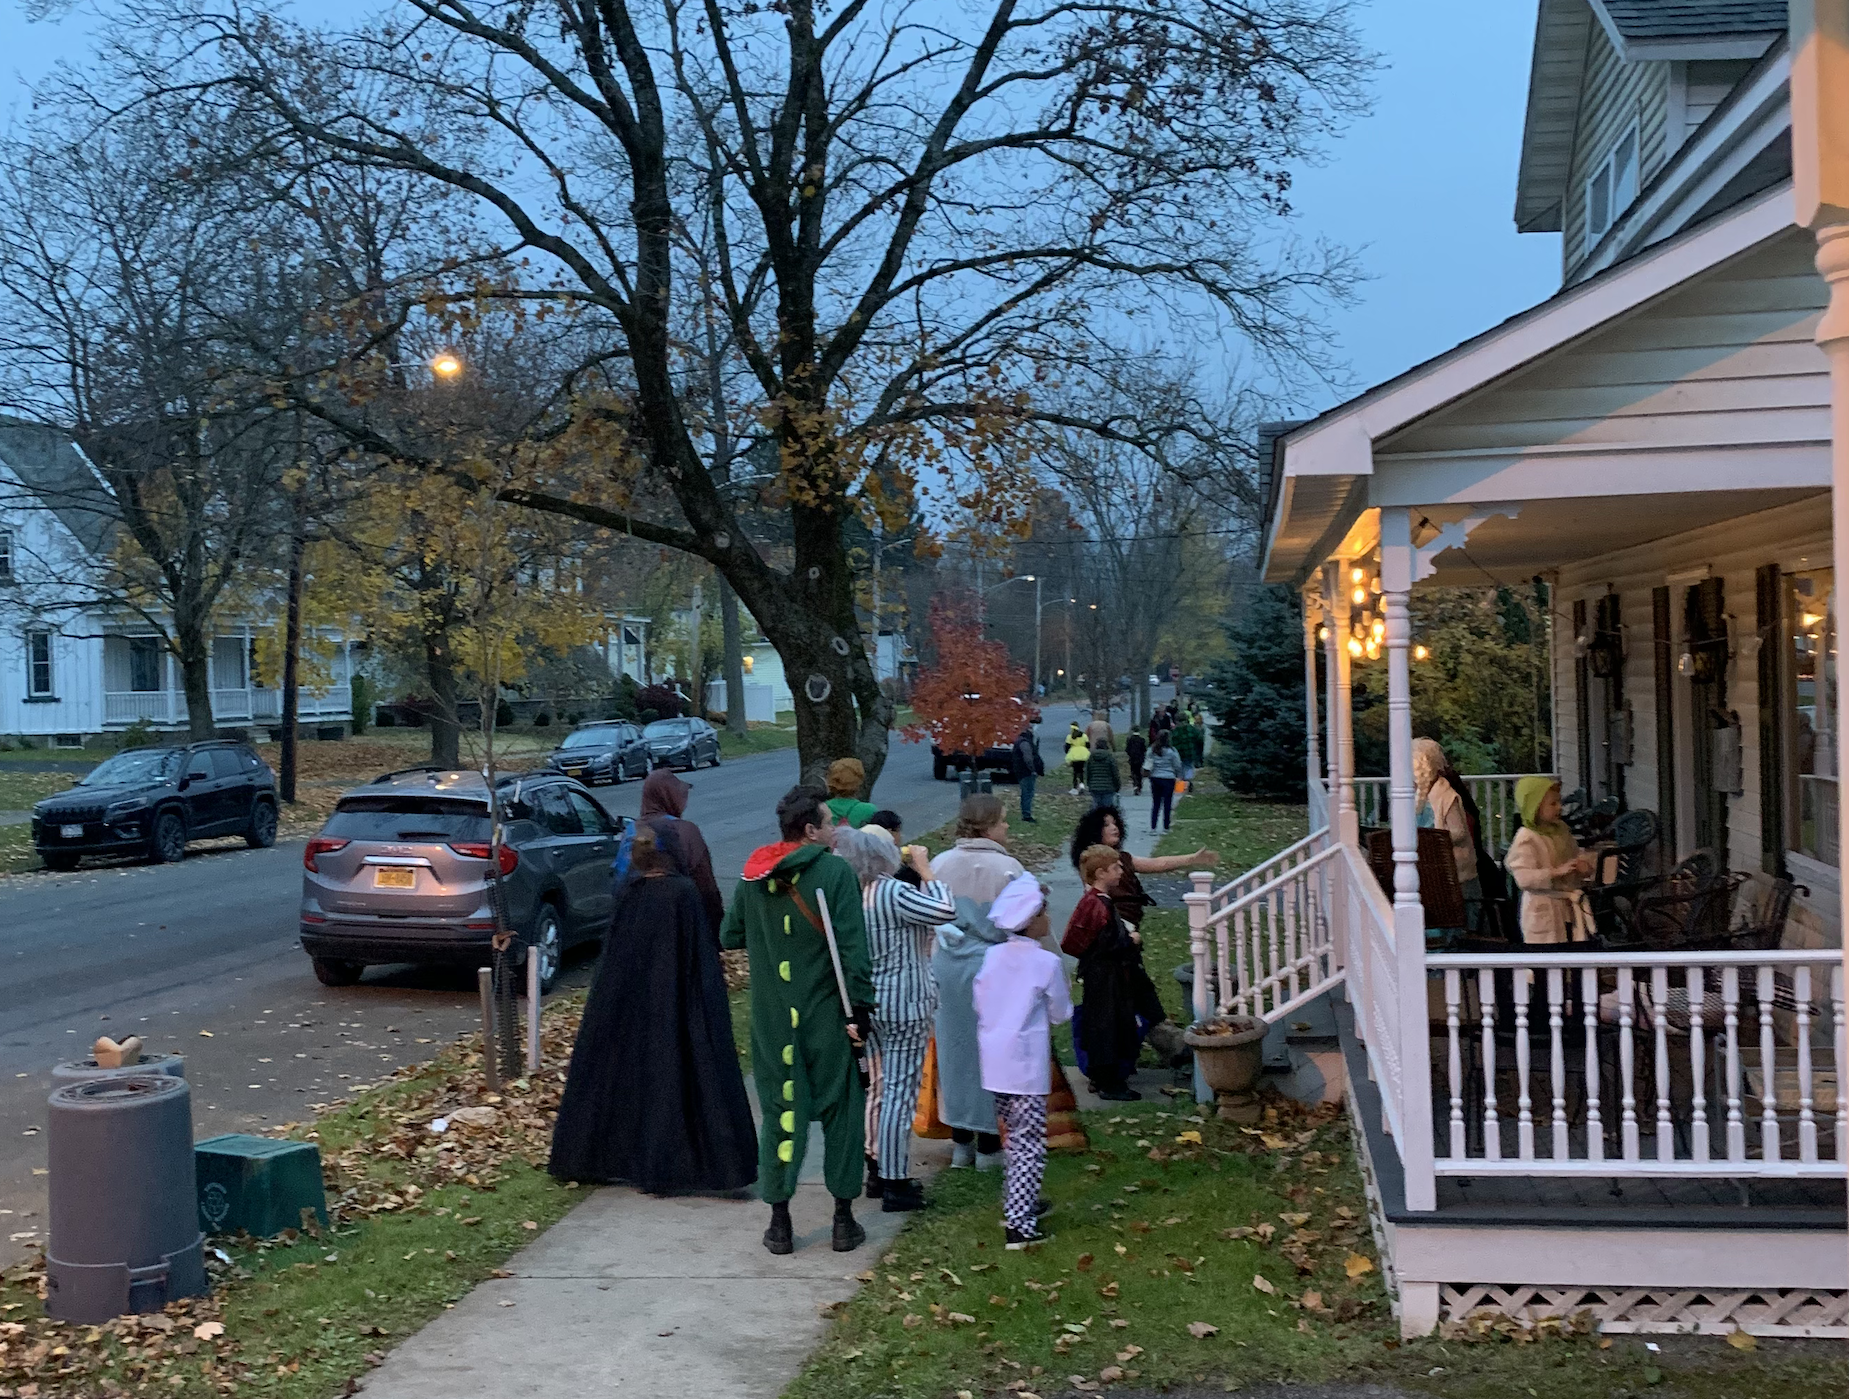 Village Celebrates Halloween with Family-Friendly Activities